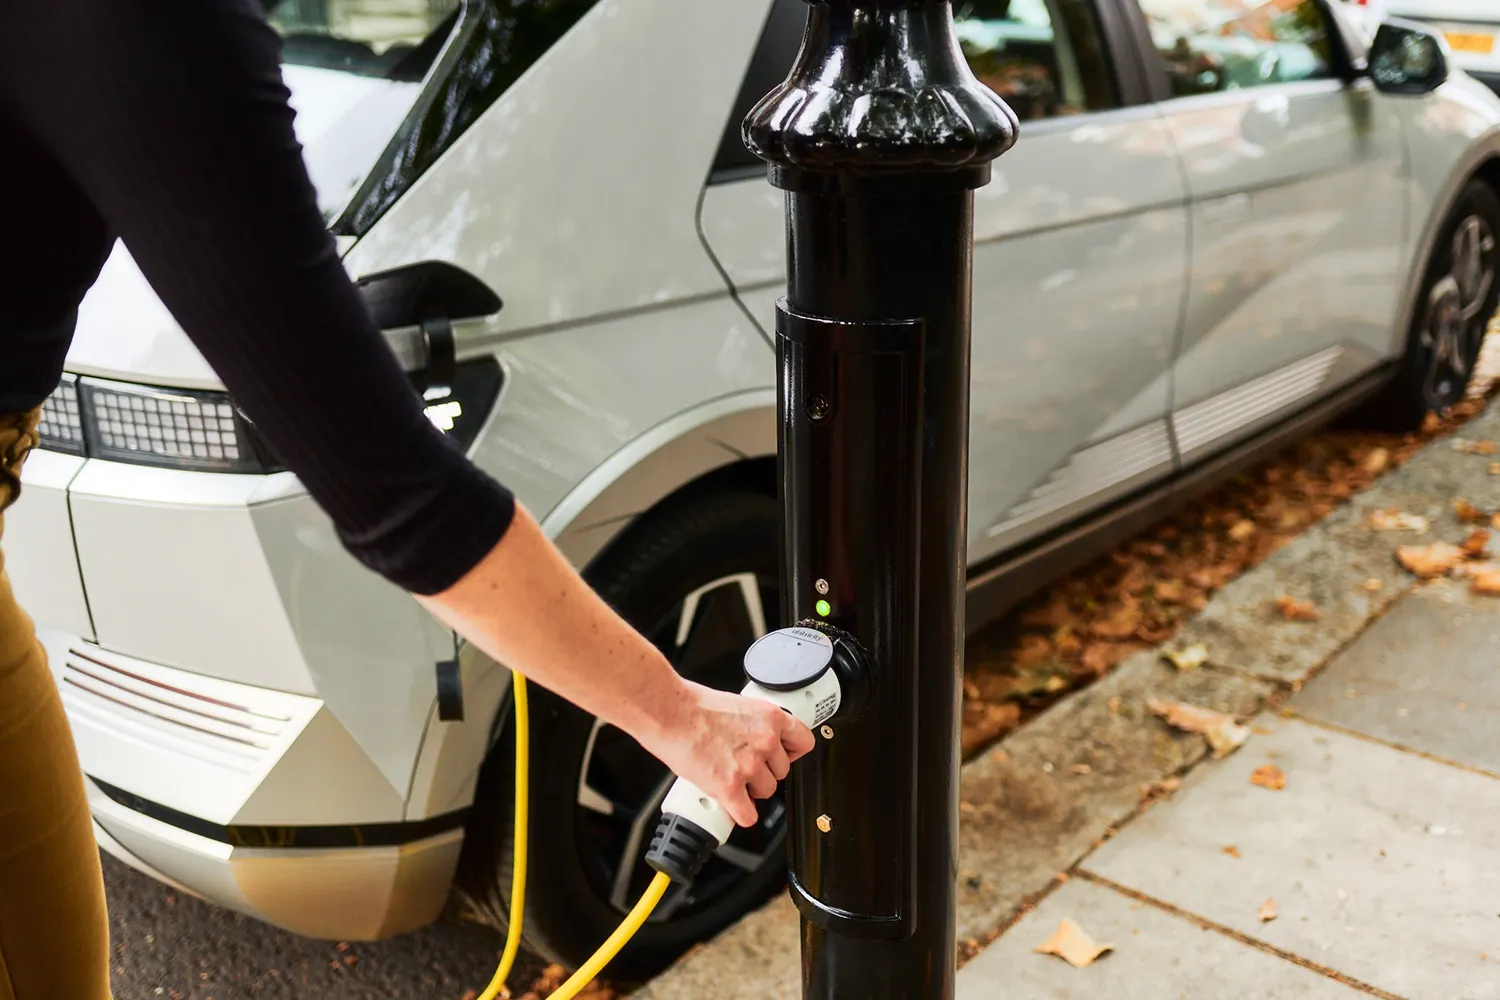 London Borough of Bexley Selects ubitricity to Provide 100 Public Lamppost and Bollard EV Charge Points